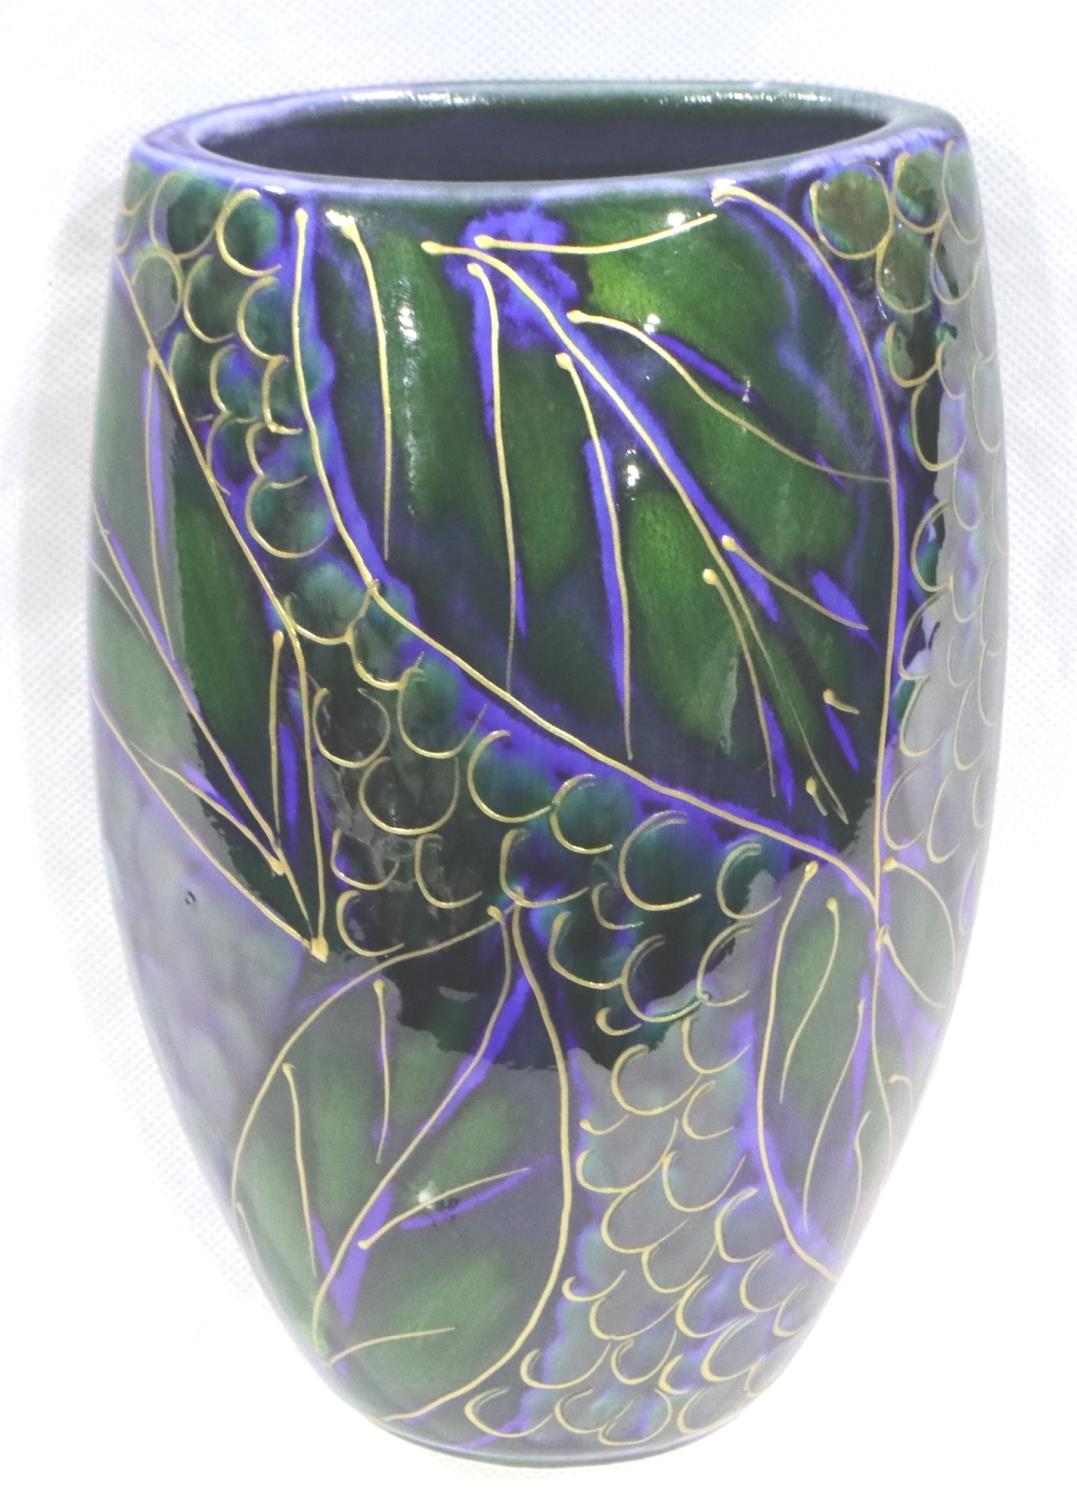 Anita Harris bulbous vase in the Blueberries pattern, H: 18 cm, no cracks or chips. P&P Group 2 (£